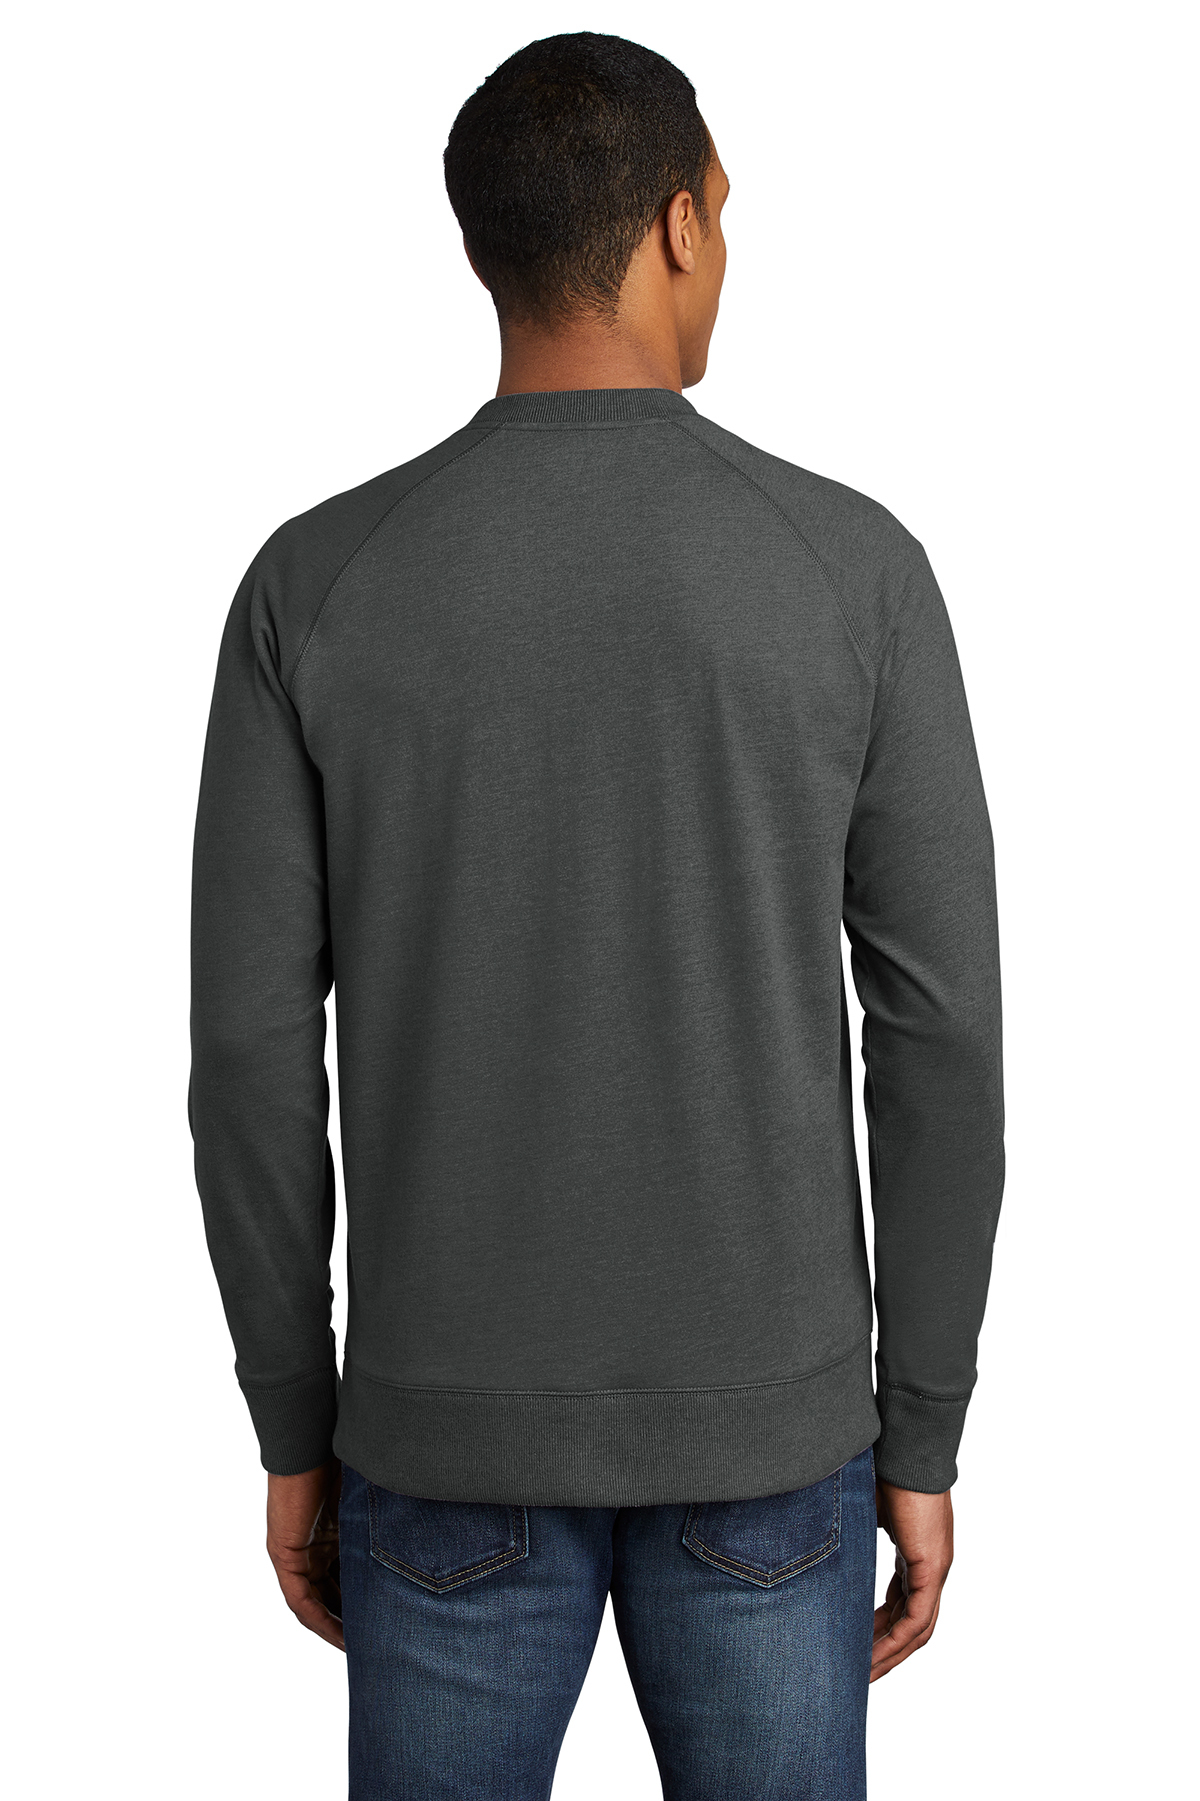 New Era Sueded Cotton Blend 1/4-Zip Pullover, Product